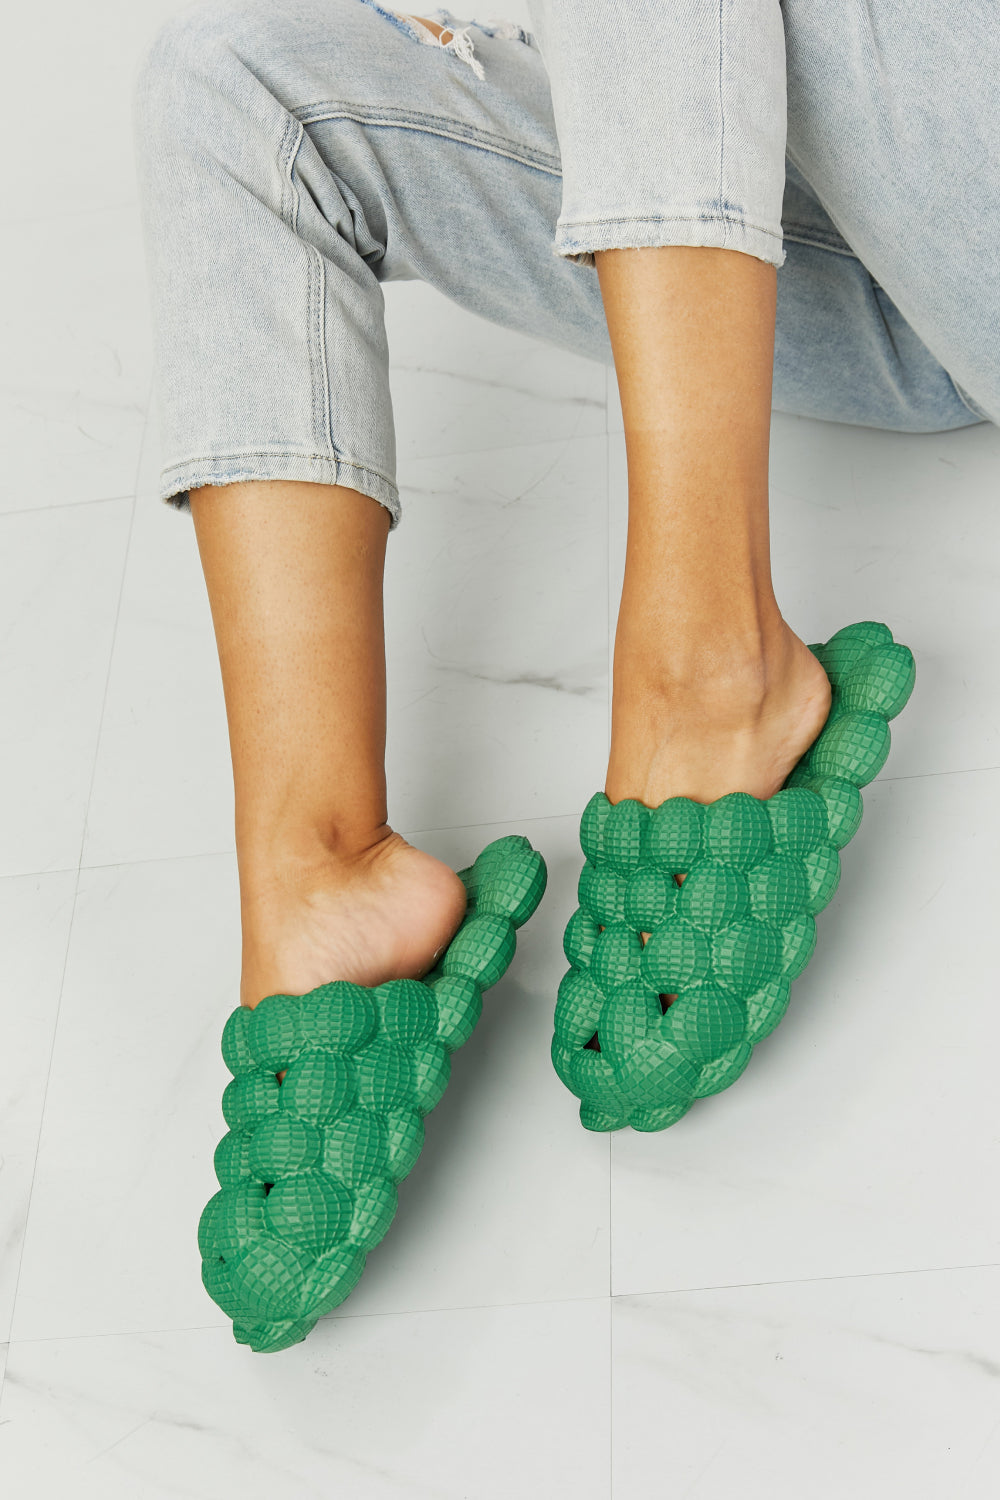 NOOK JOI Laid Back Bubble Slides in Green - Tigbul's Fashion